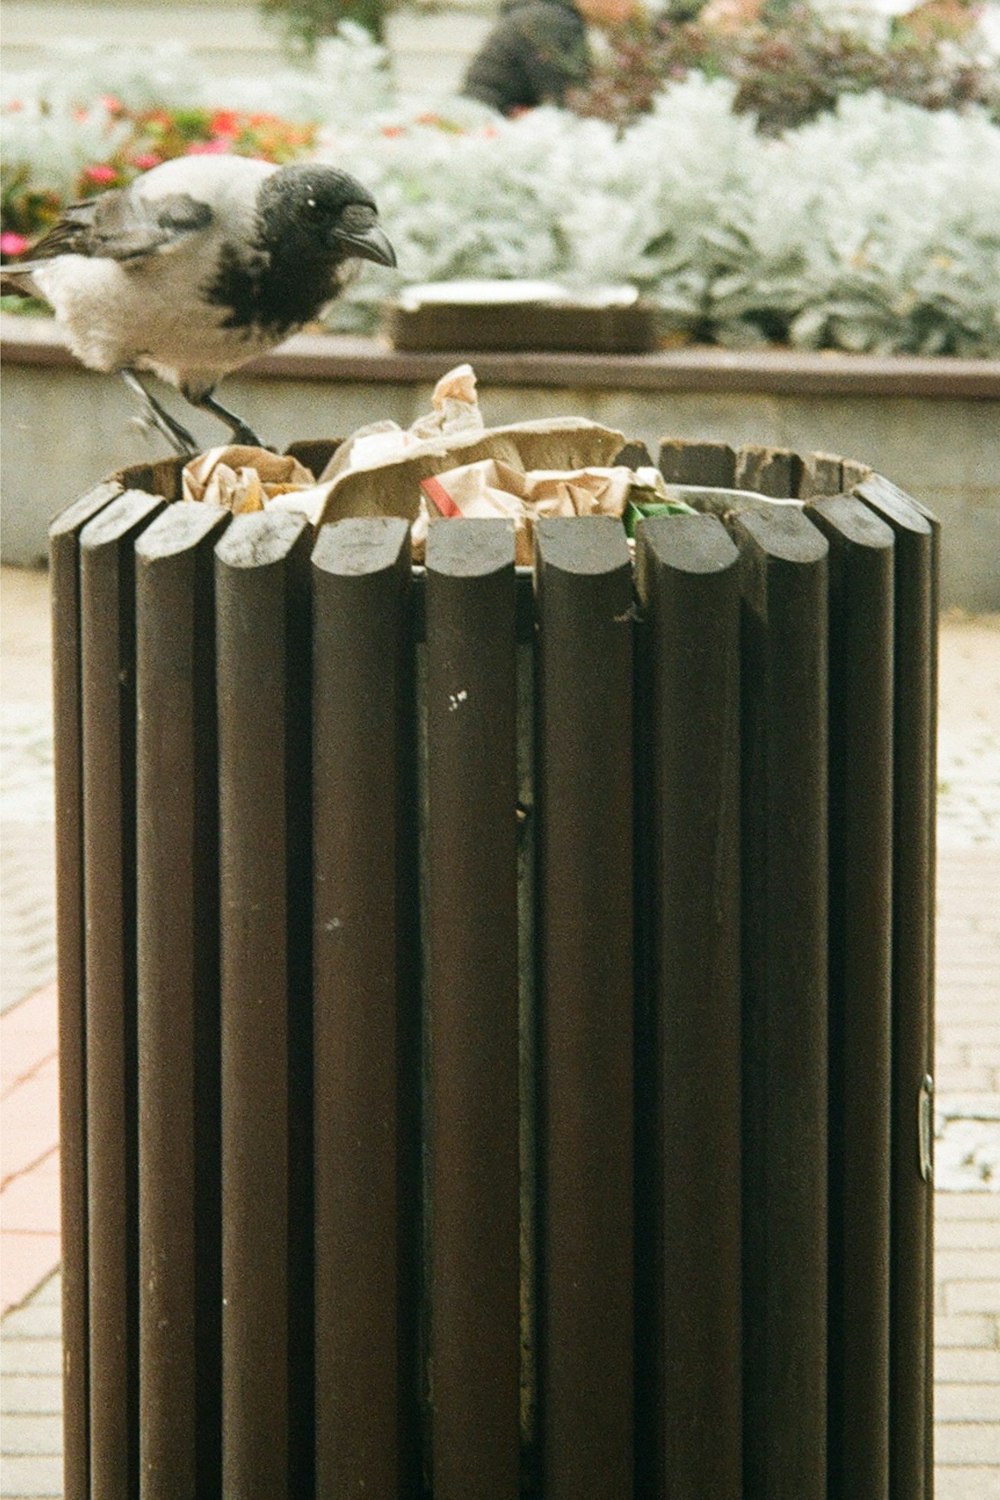 a bird sitting on top of a trash can